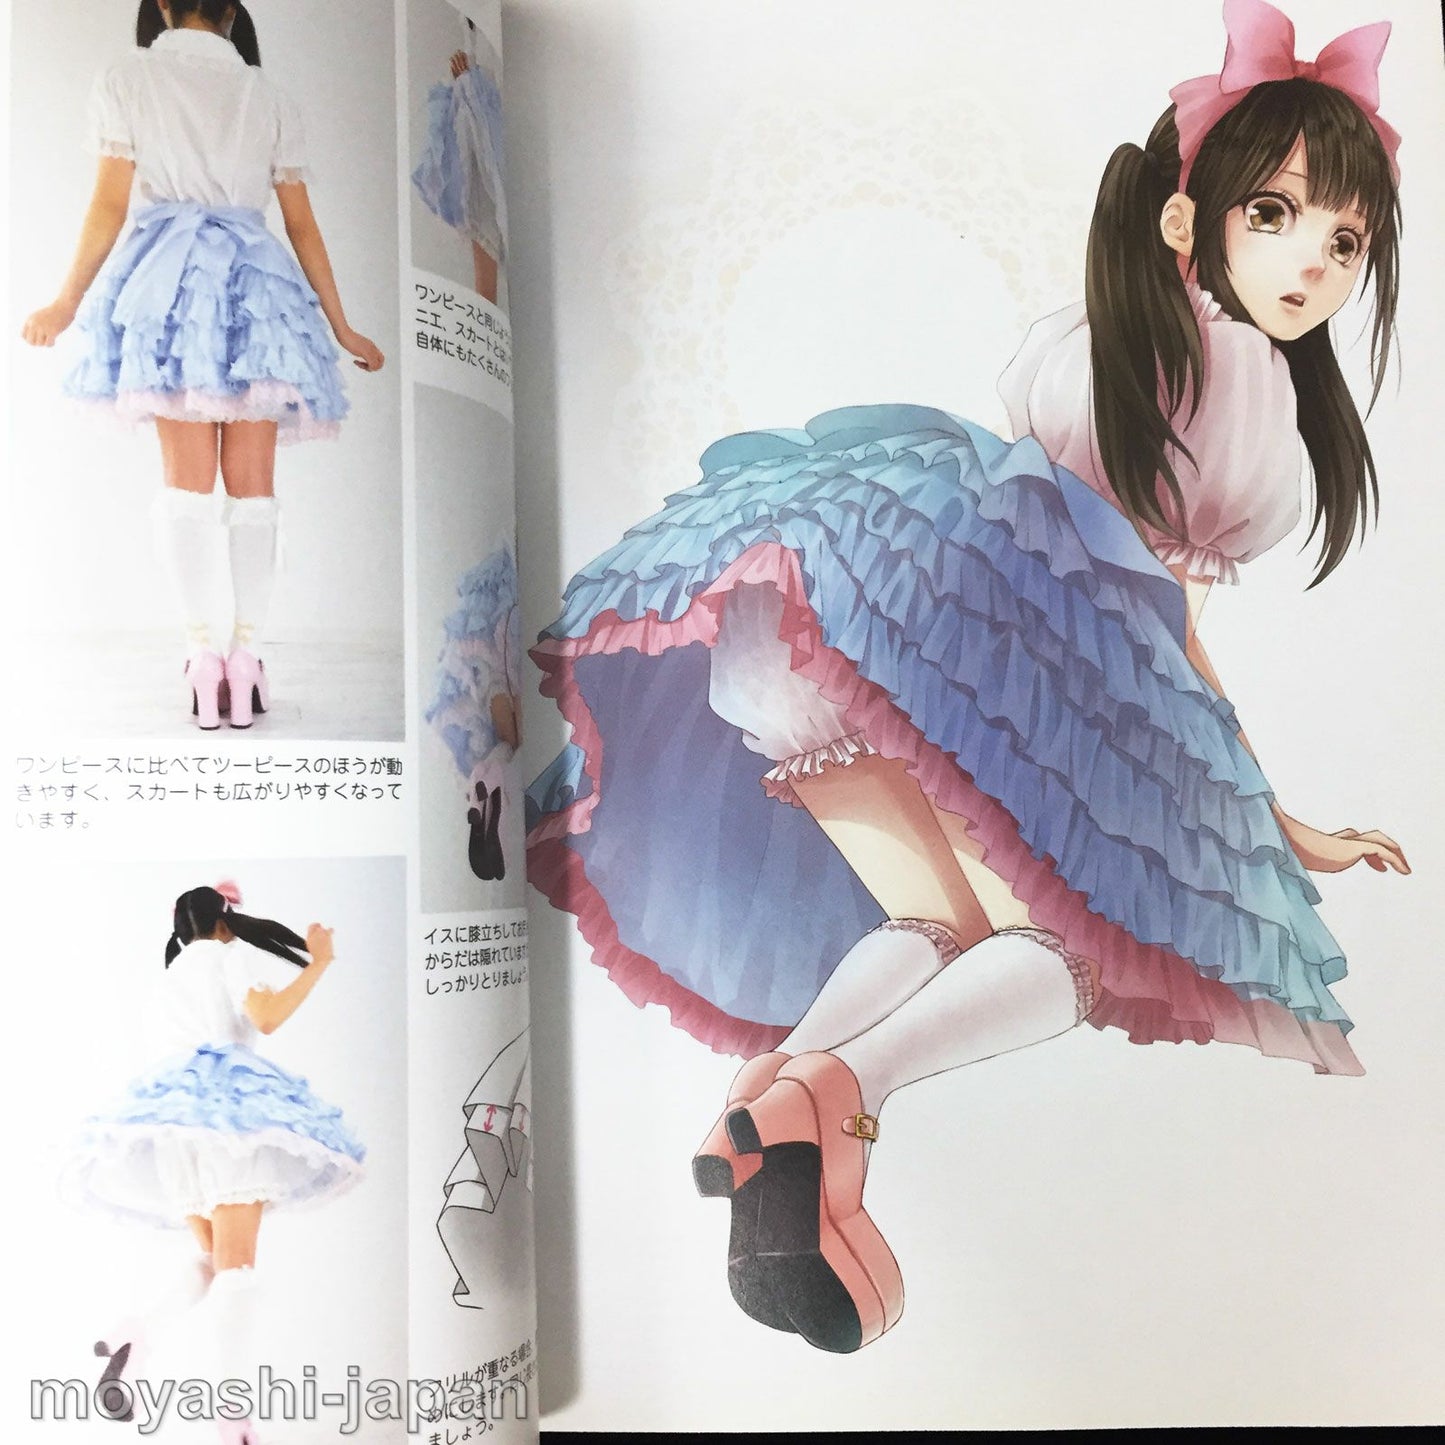 How To Draw Moe Lolita Fashion, face, body, clothes